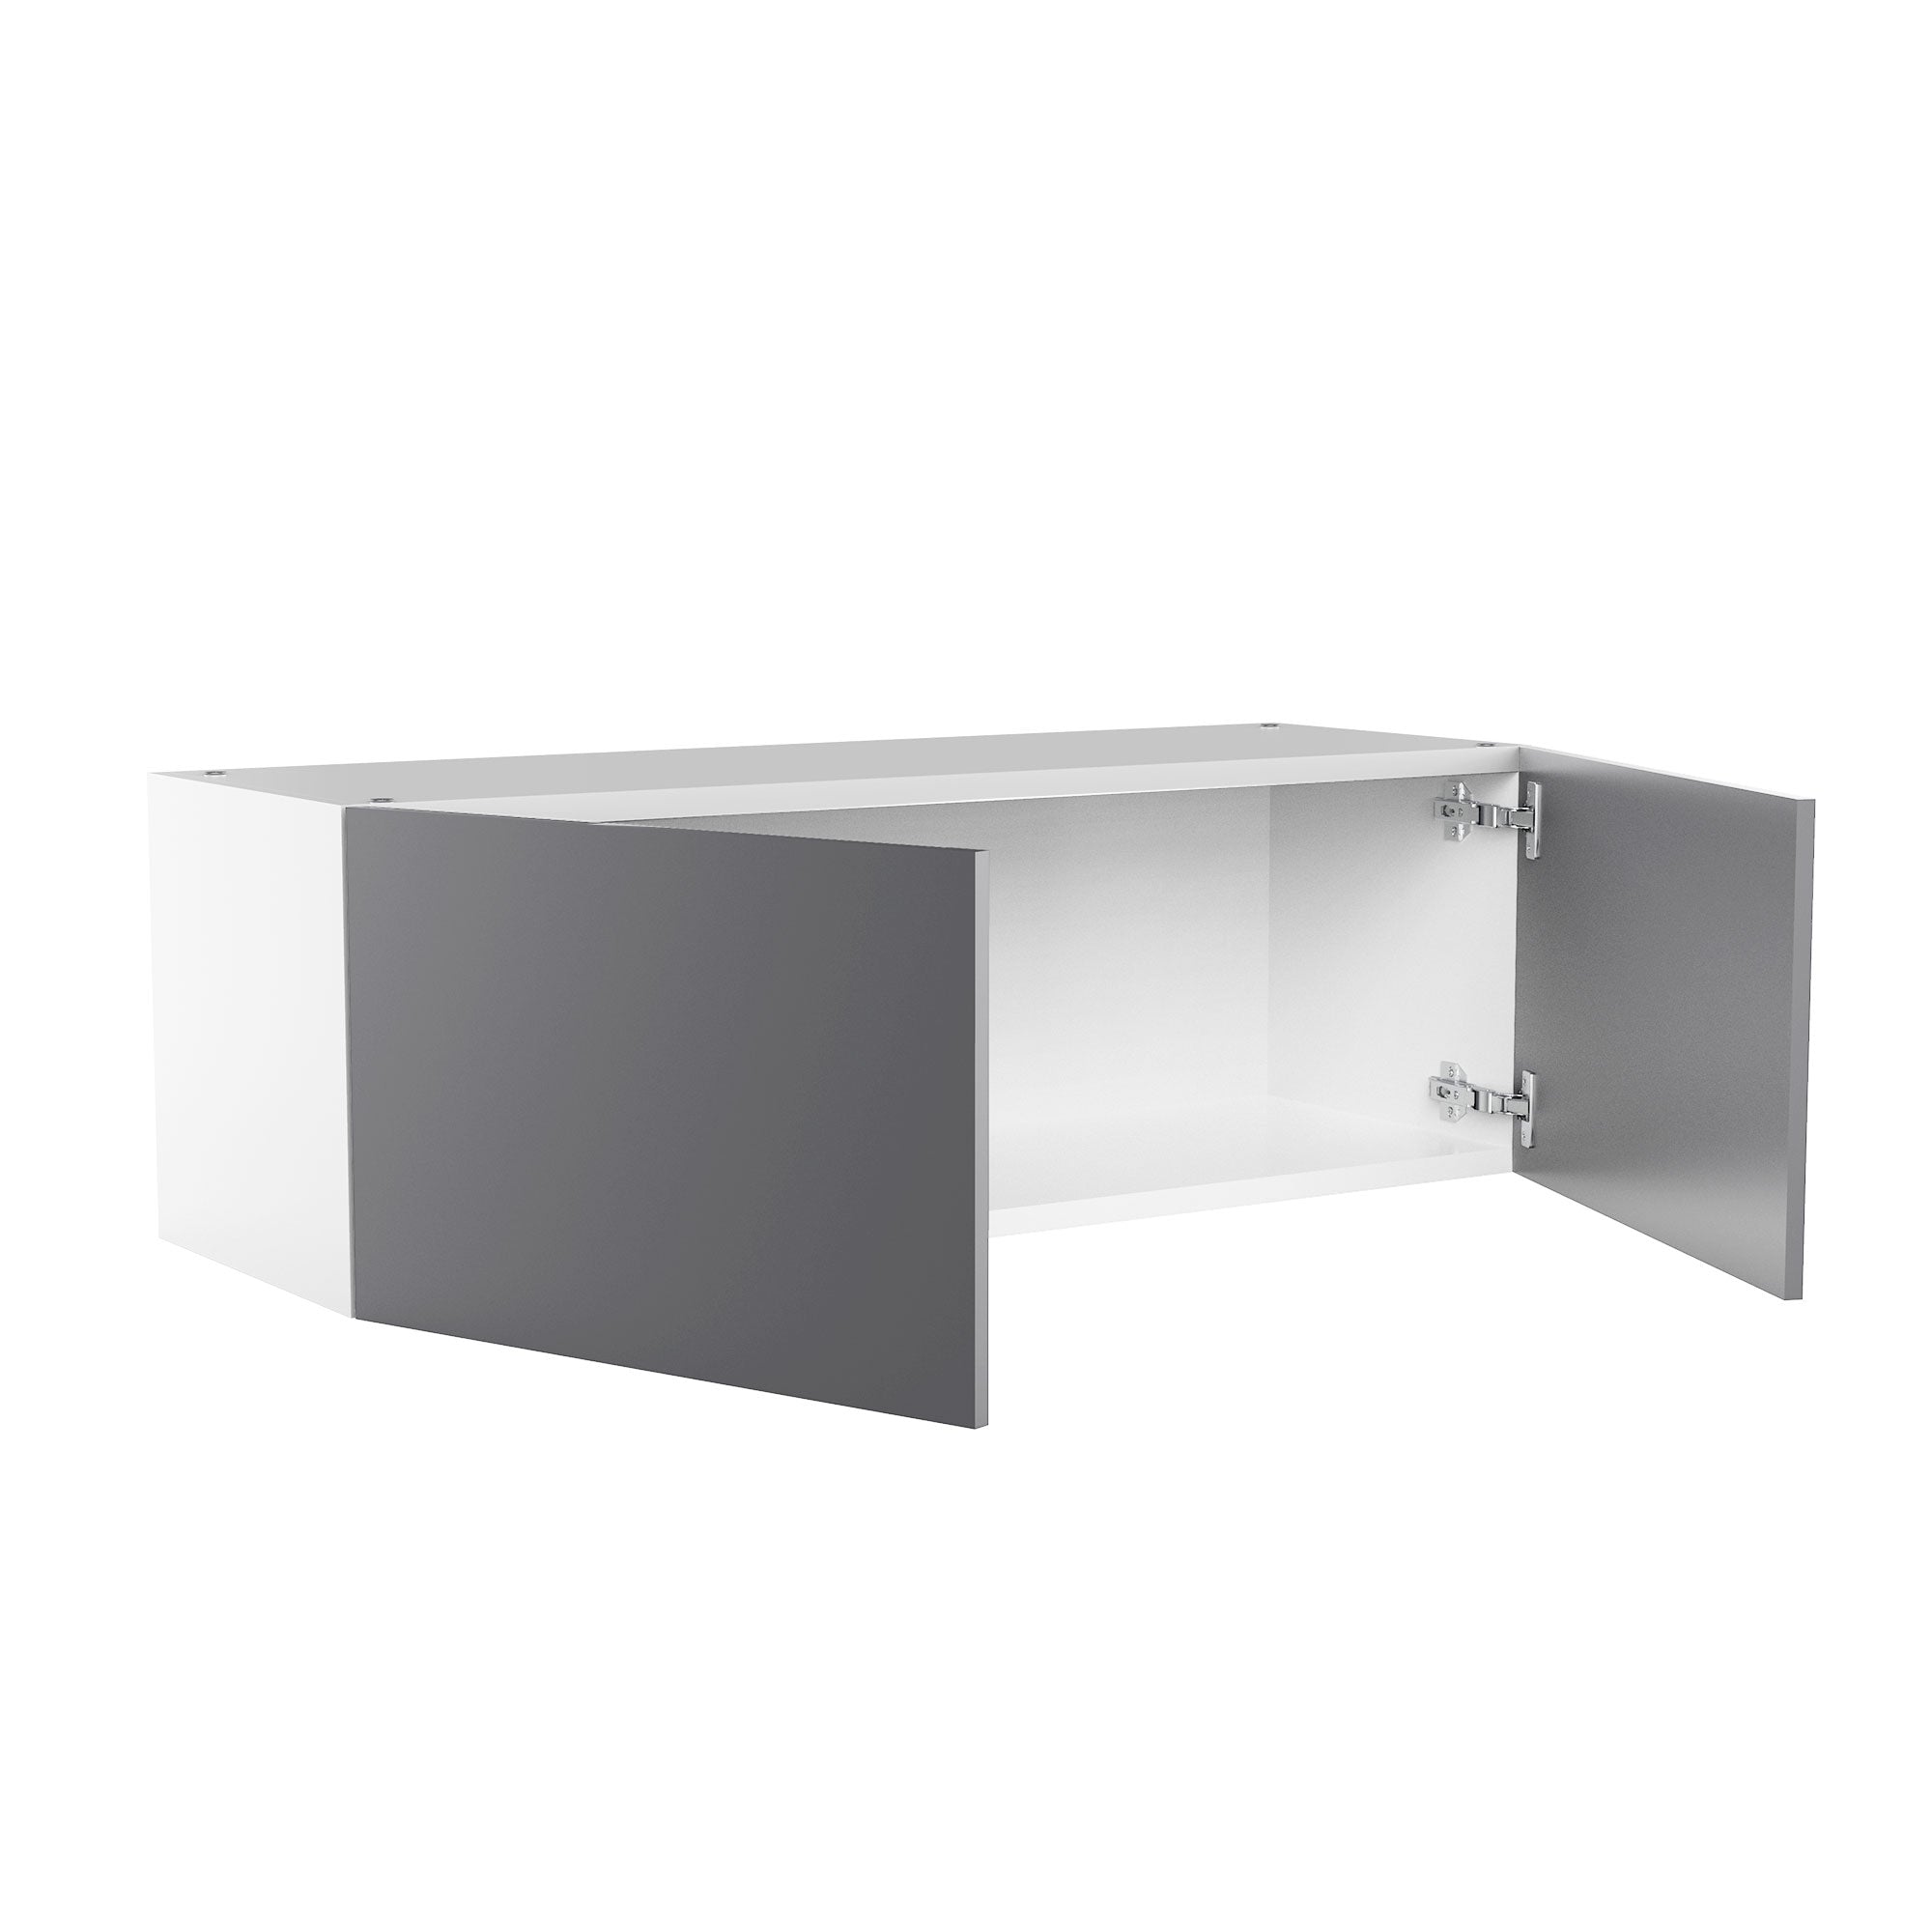 RTA - Glossy Grey - Double Door Wall Cabinets | 36"W x 12"H x 12"D